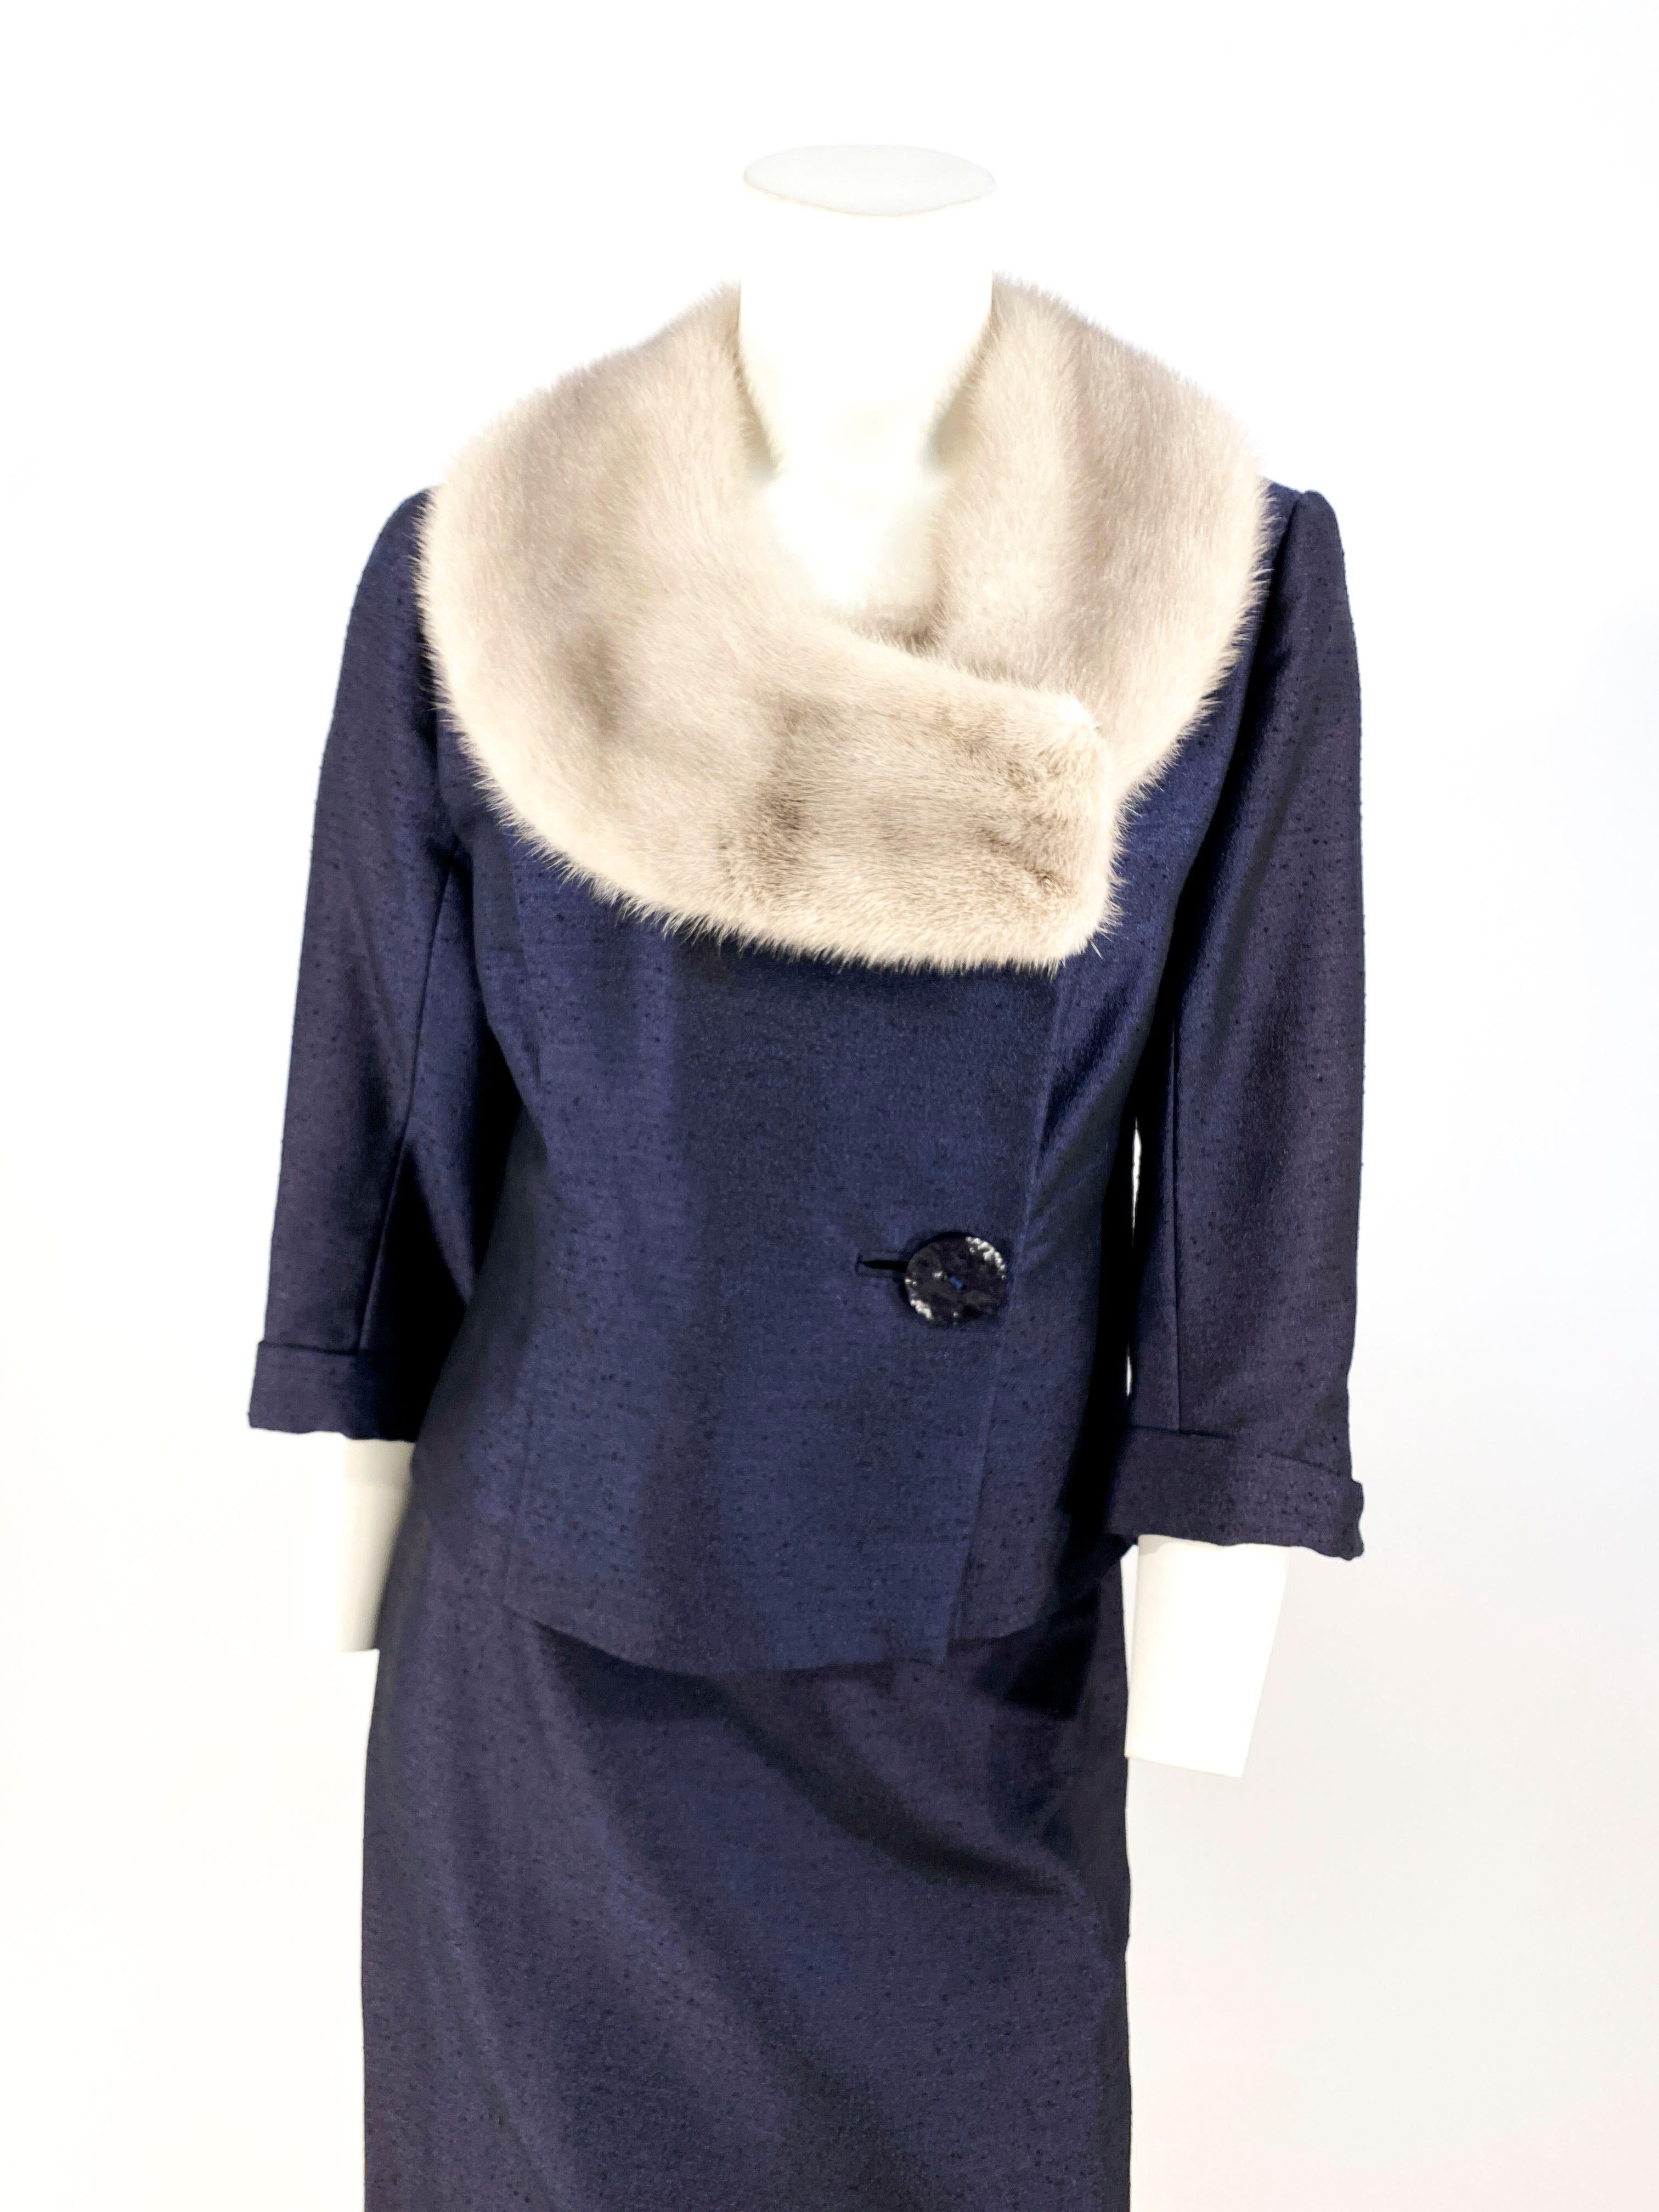 1960s navy blue textured suit with a cropped jacket featuring an enlarged silver grey mink shawl collar, large designer buttons, three-quarter length cuffed sleeves, and a asymmetrical jacket face. The jacket is fully lined but the straight skirt is